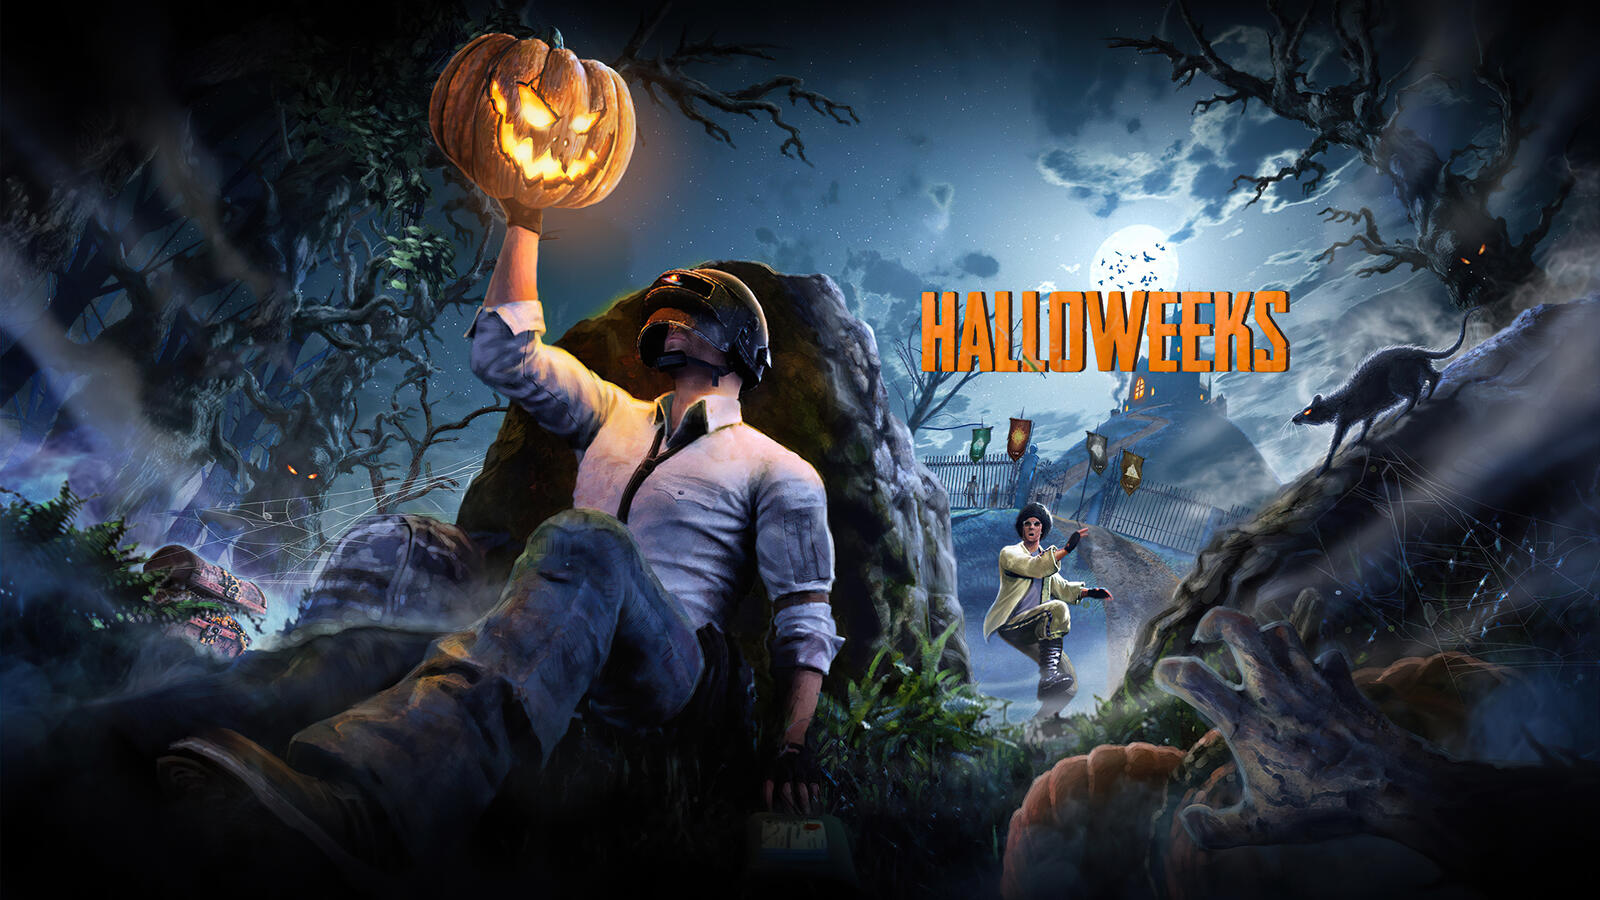 Free photo Halloween picture from Playerunknowns Battlegrounds game